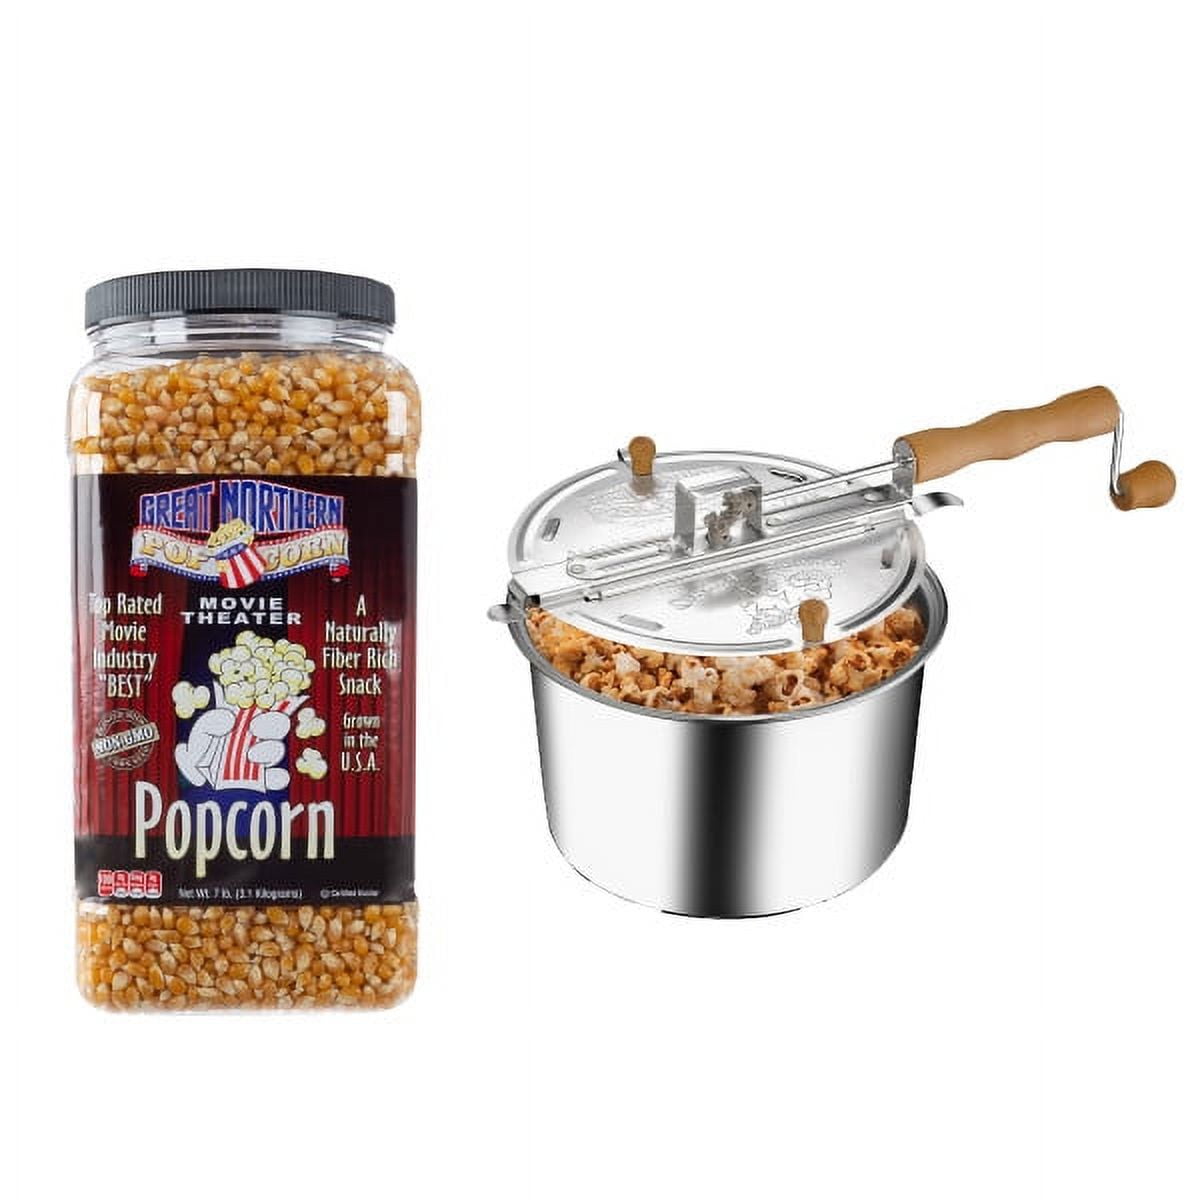 Cook N Home Stovetop Popcorn Popper with Crank, 6 Quart Stainless